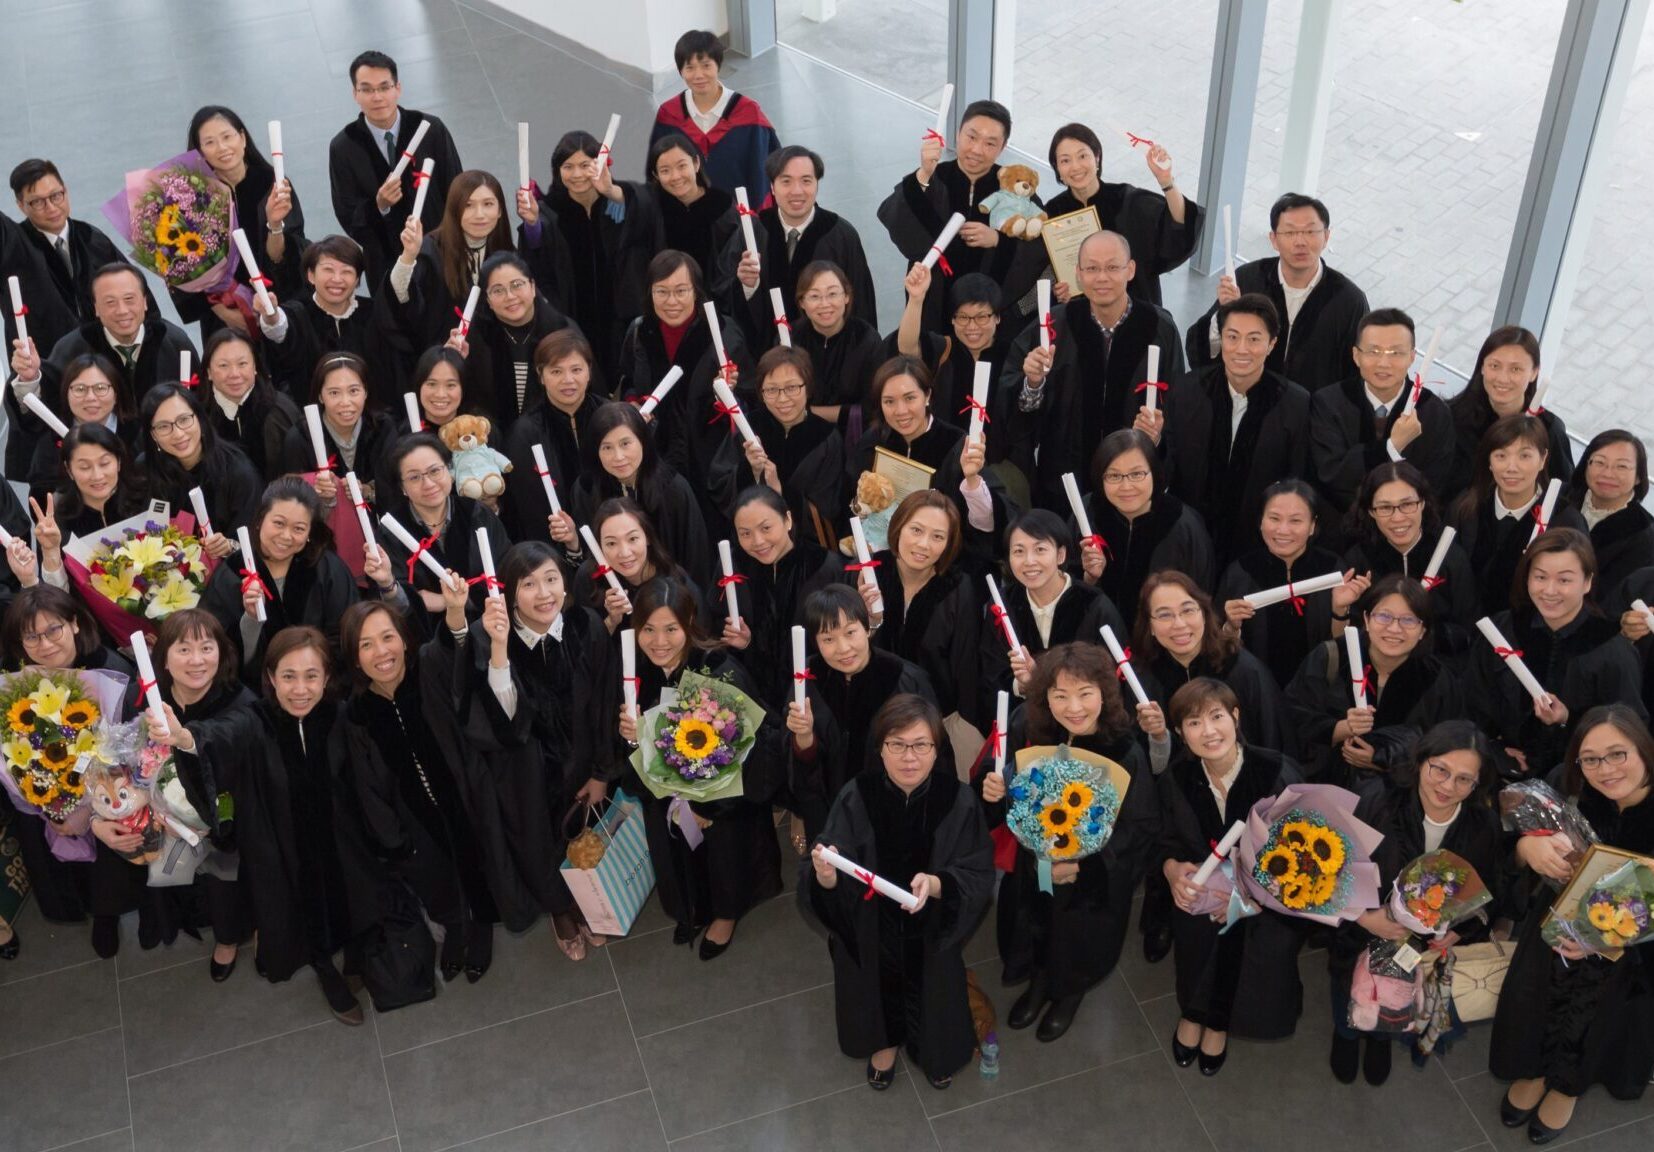 Professional Diploma in Advanced Nursing Practice (PDANP) graduation photo wit certificates and flowers